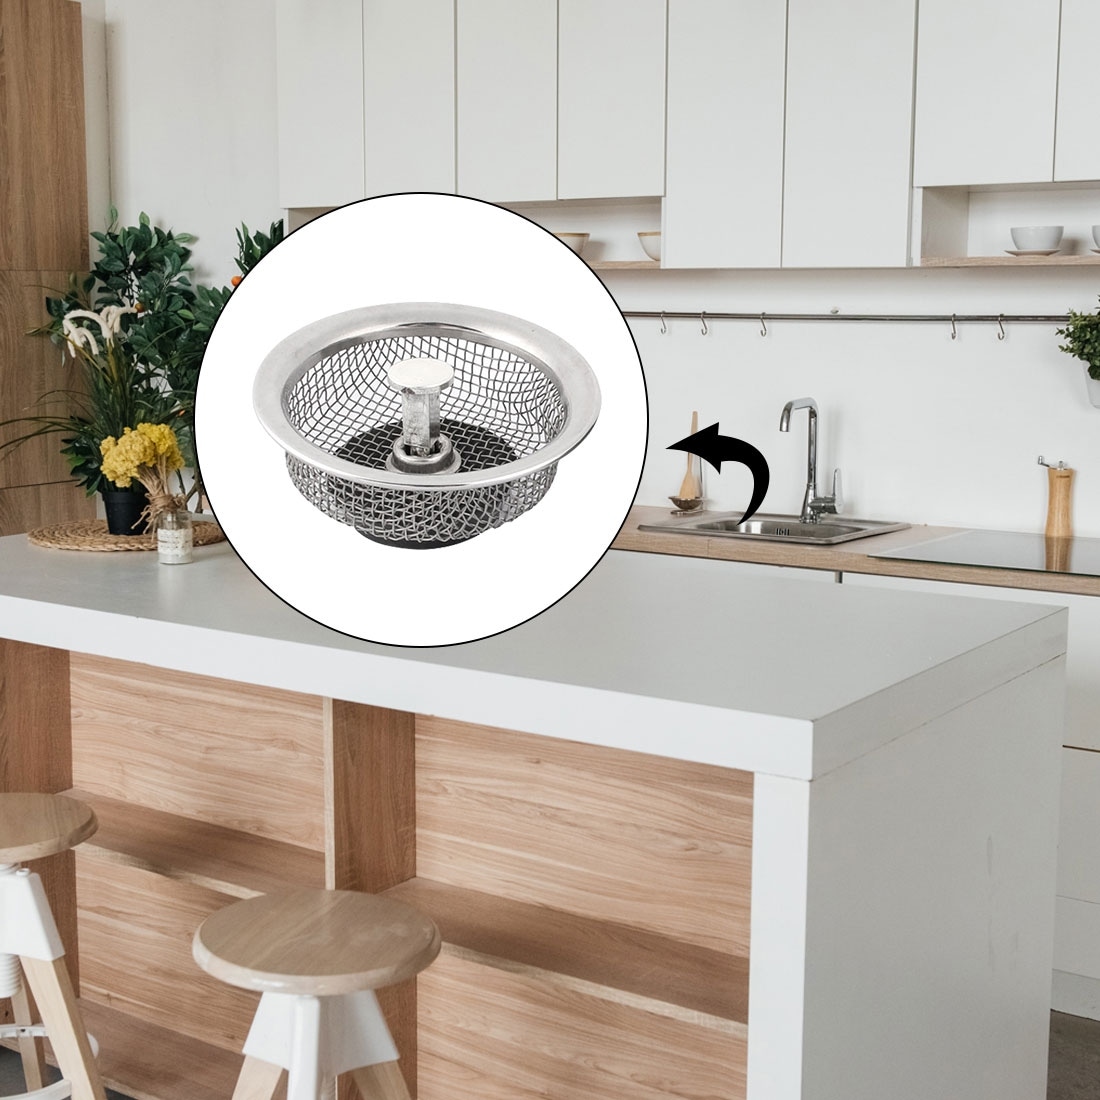 https://ak1.ostkcdn.com/images/products/is/images/direct/17f1ecf131d2c35680baade118e2e93642702e0c/Stainless-Steel-Round-Shape-Mesh-Screen-Sink-Strainer-8.5cm-Dia-2Pcs.jpg